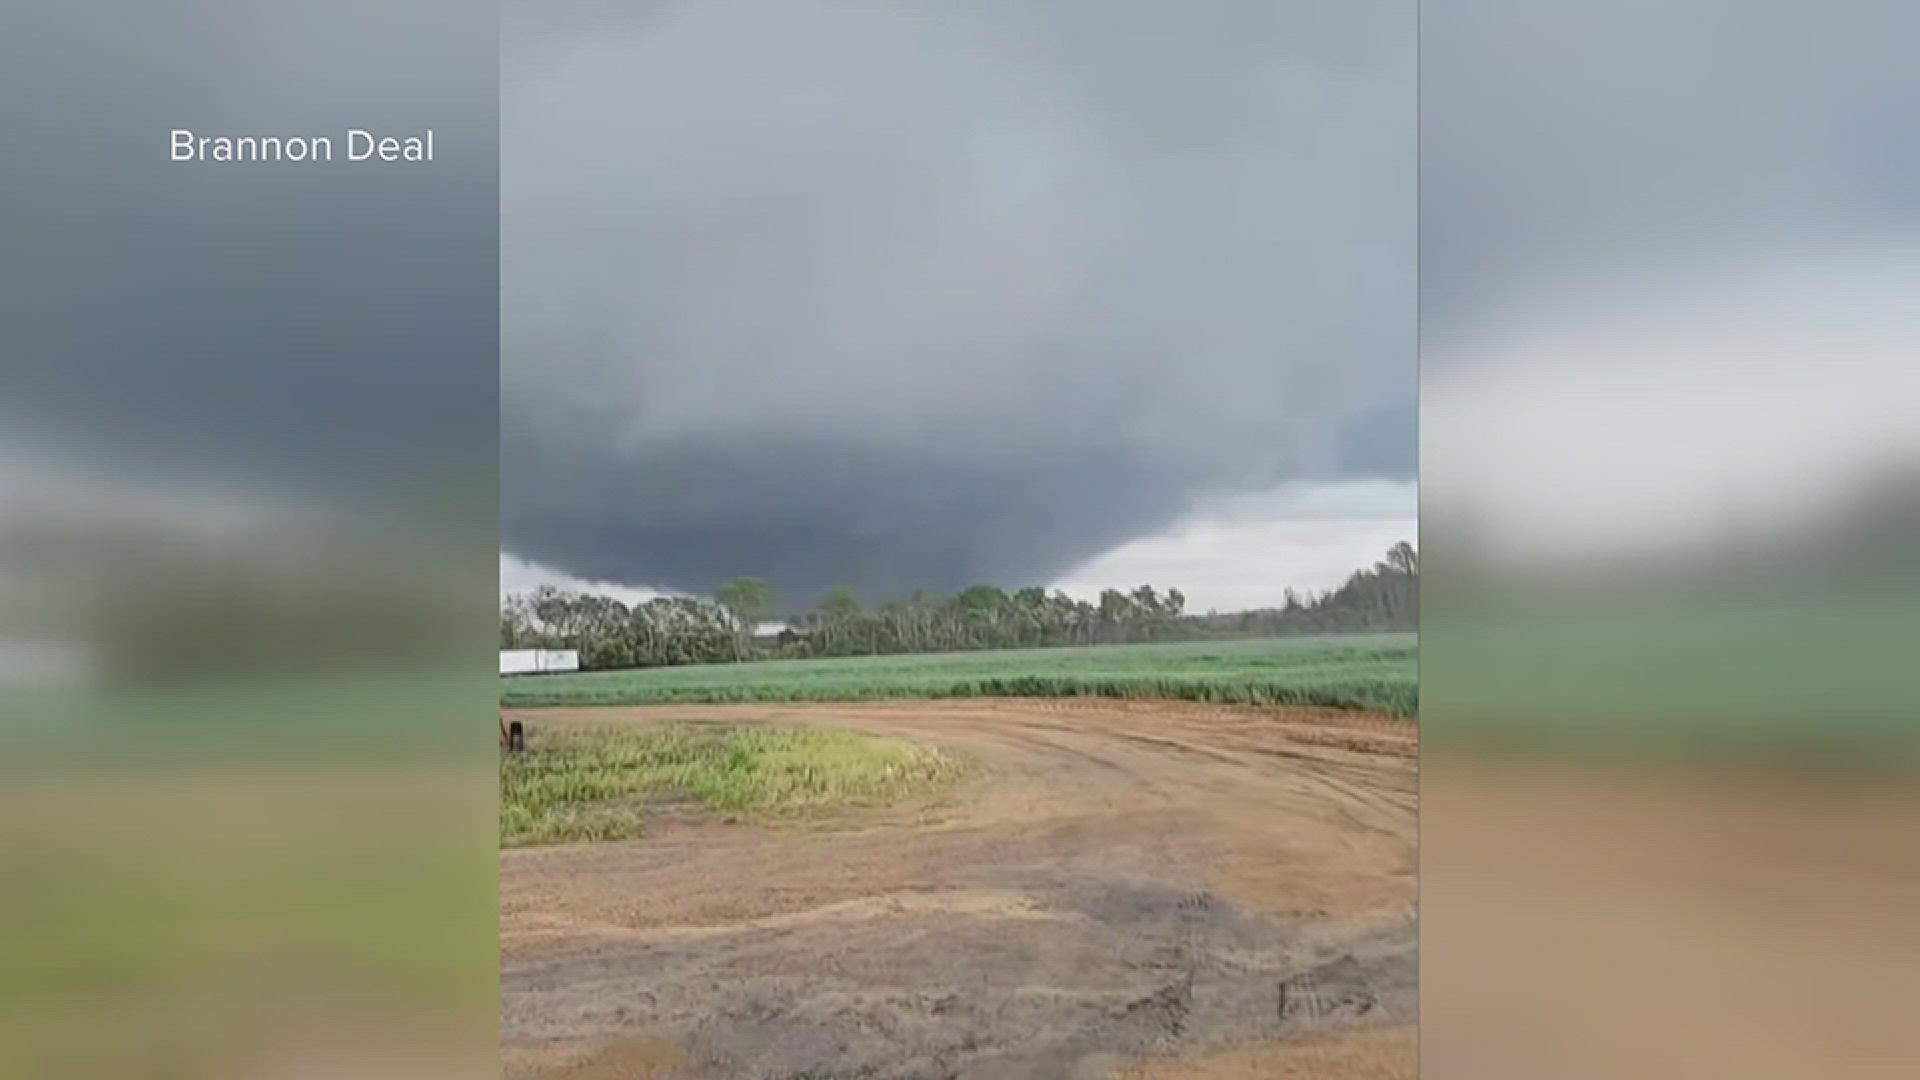 Video of a large tornado in Allendale County, South Carolina on April 5, 2002